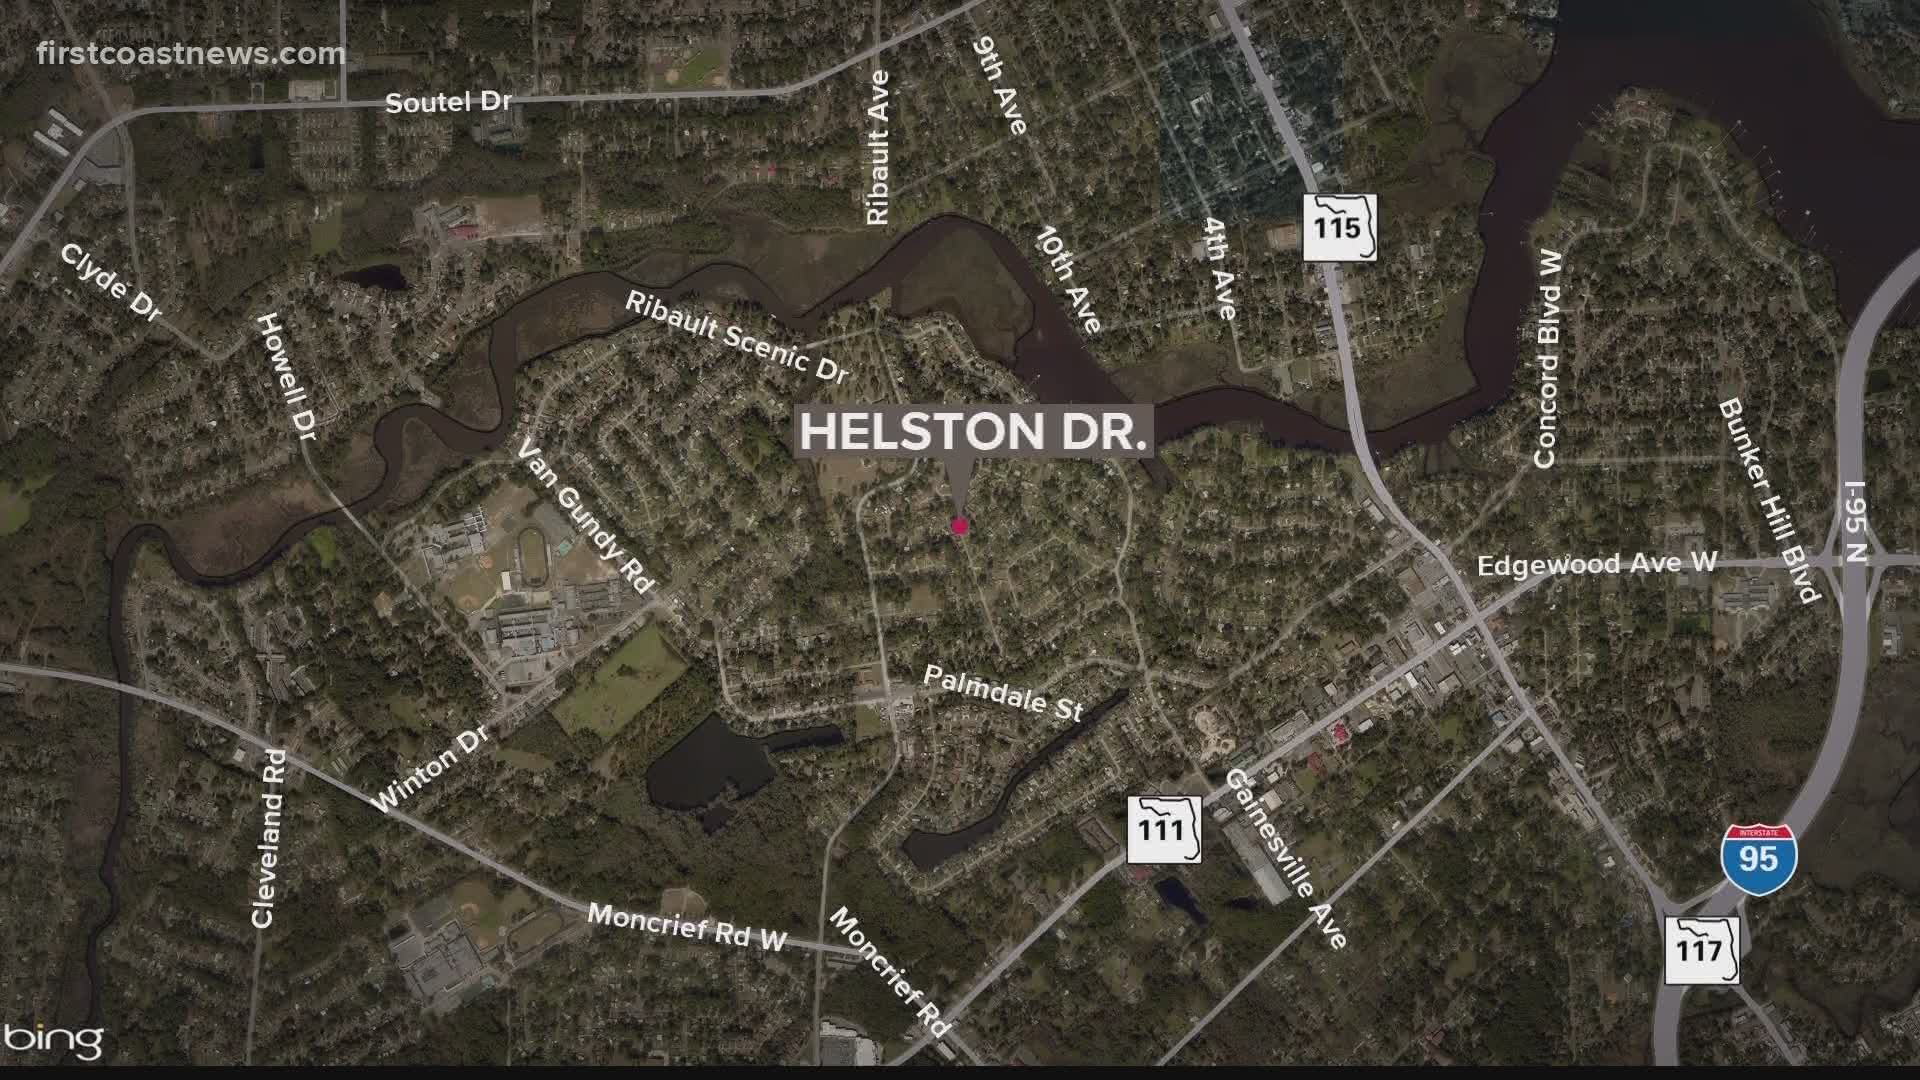 The investigation found the victim was in a car at Helston Drive and Denham Road west when suspects, possibly in two vehicles, began shooting, police said.